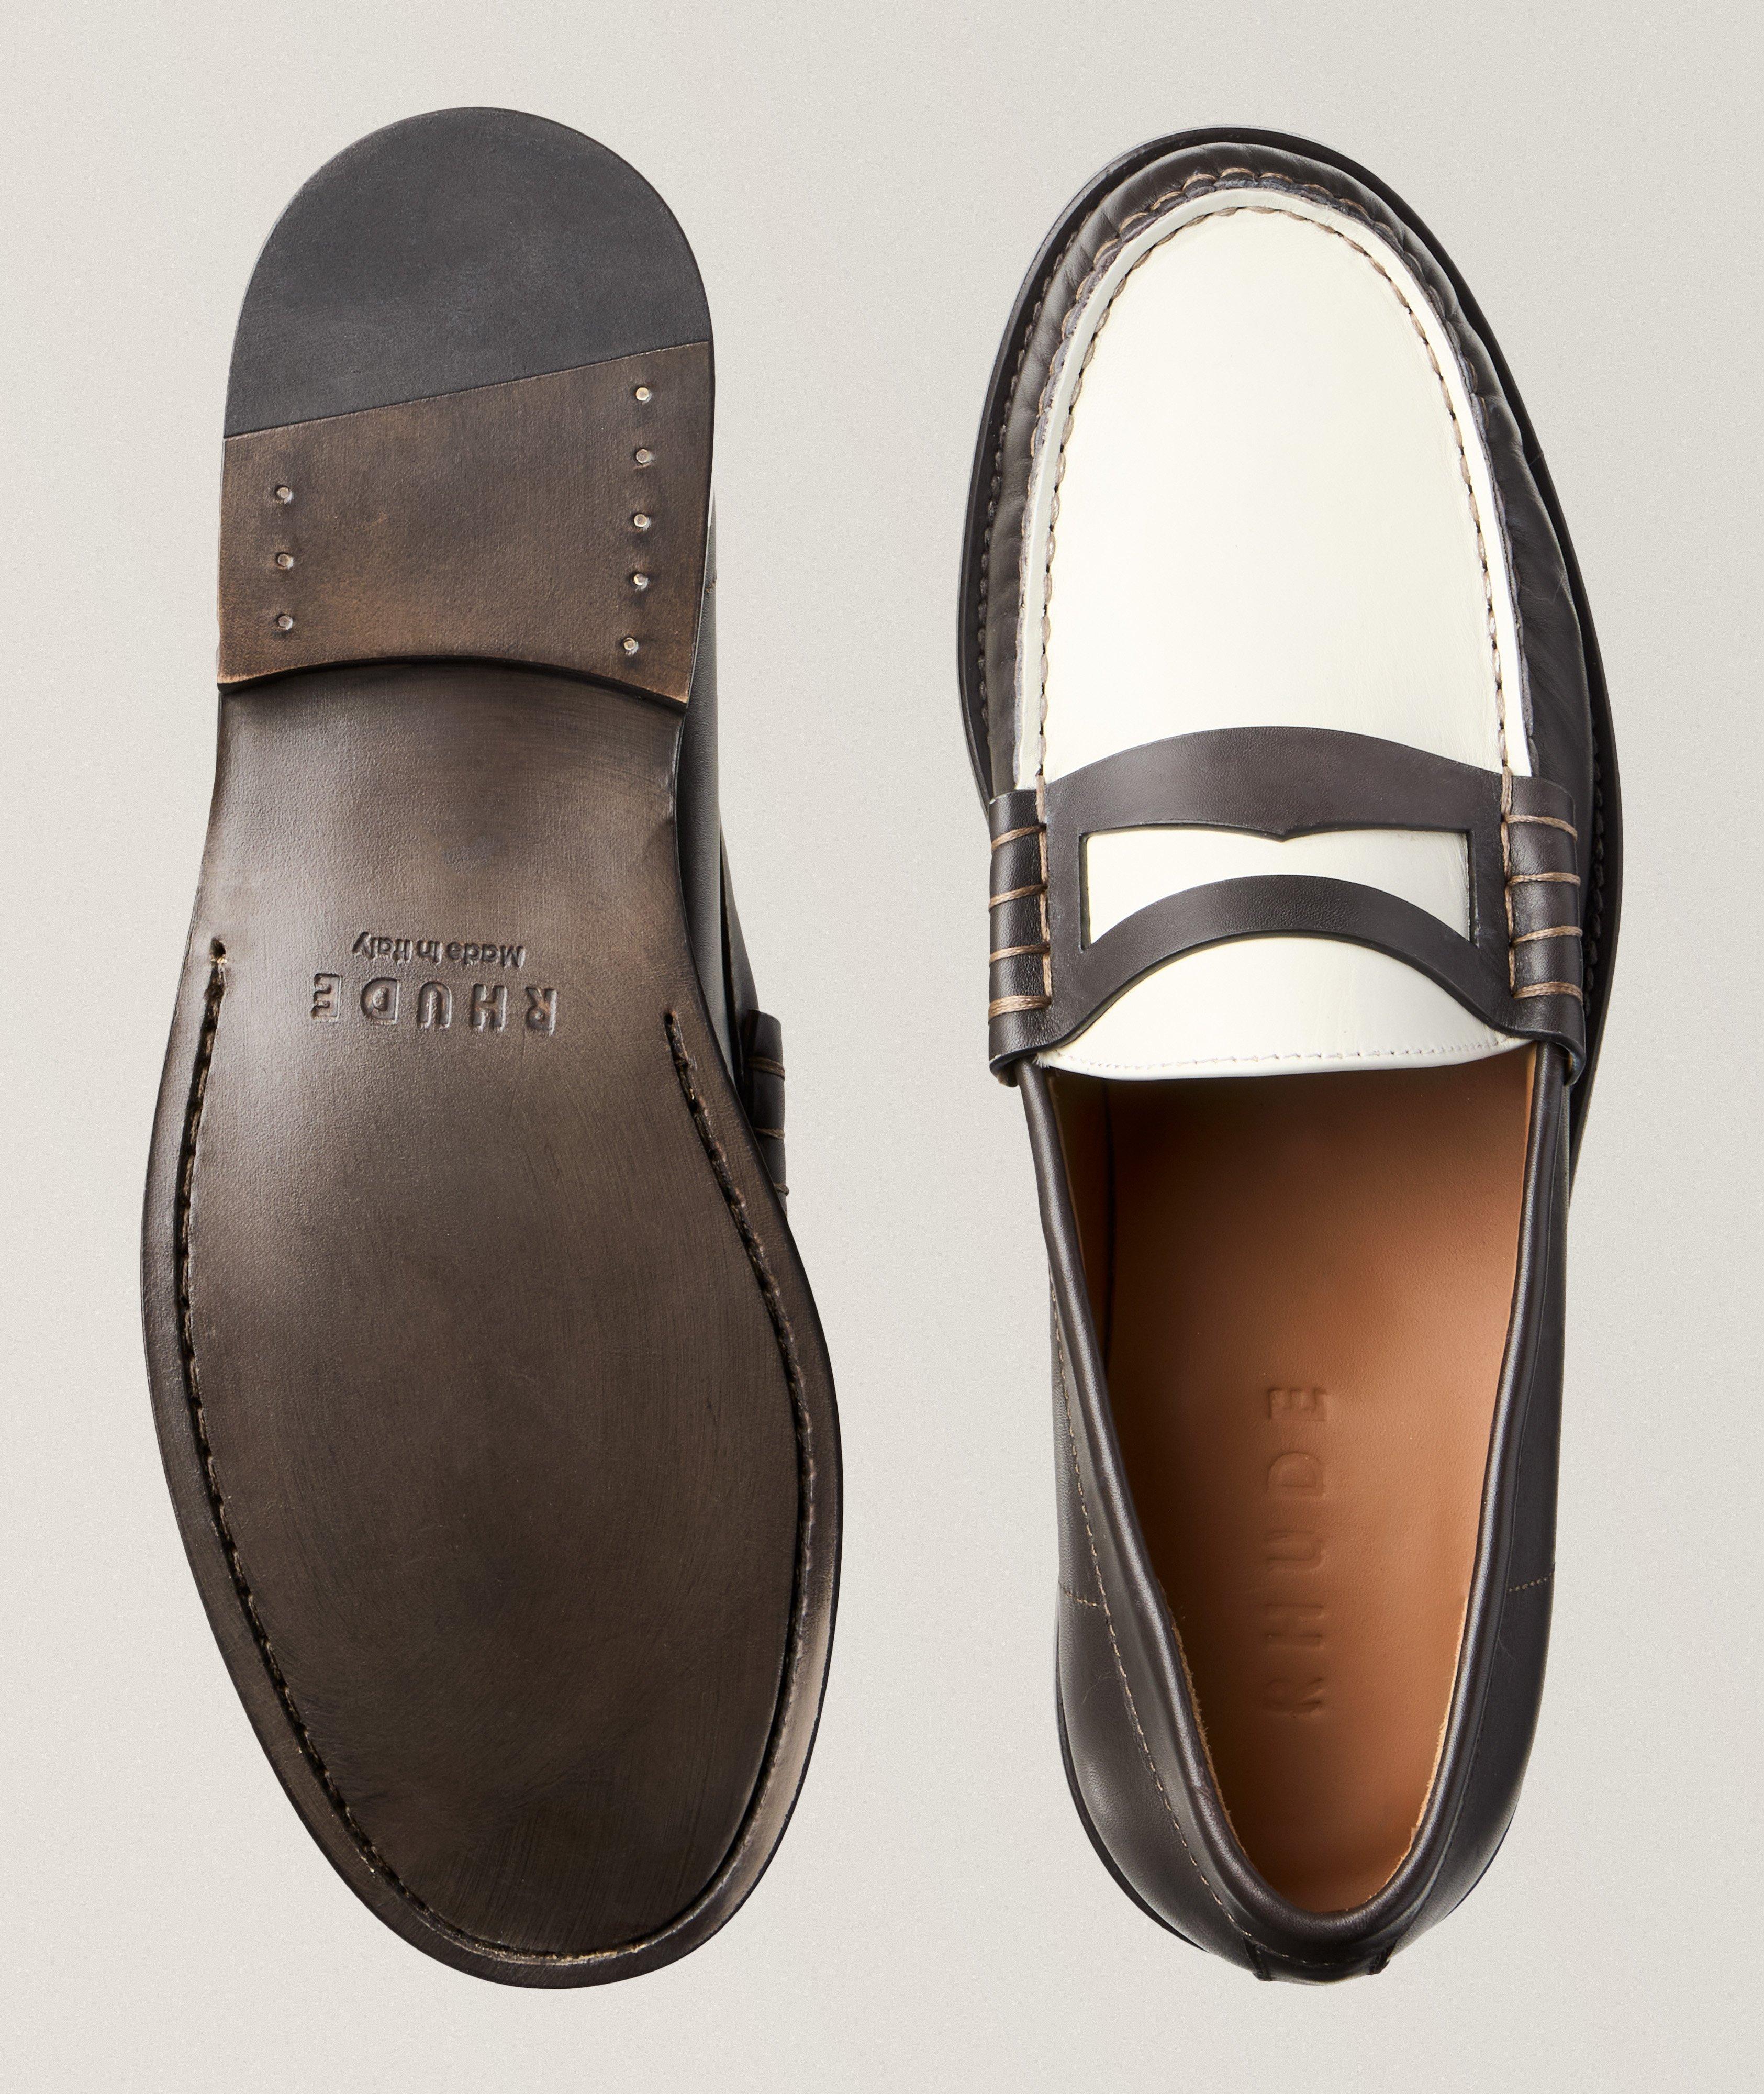 Two-Tone Leather Penny Loafers